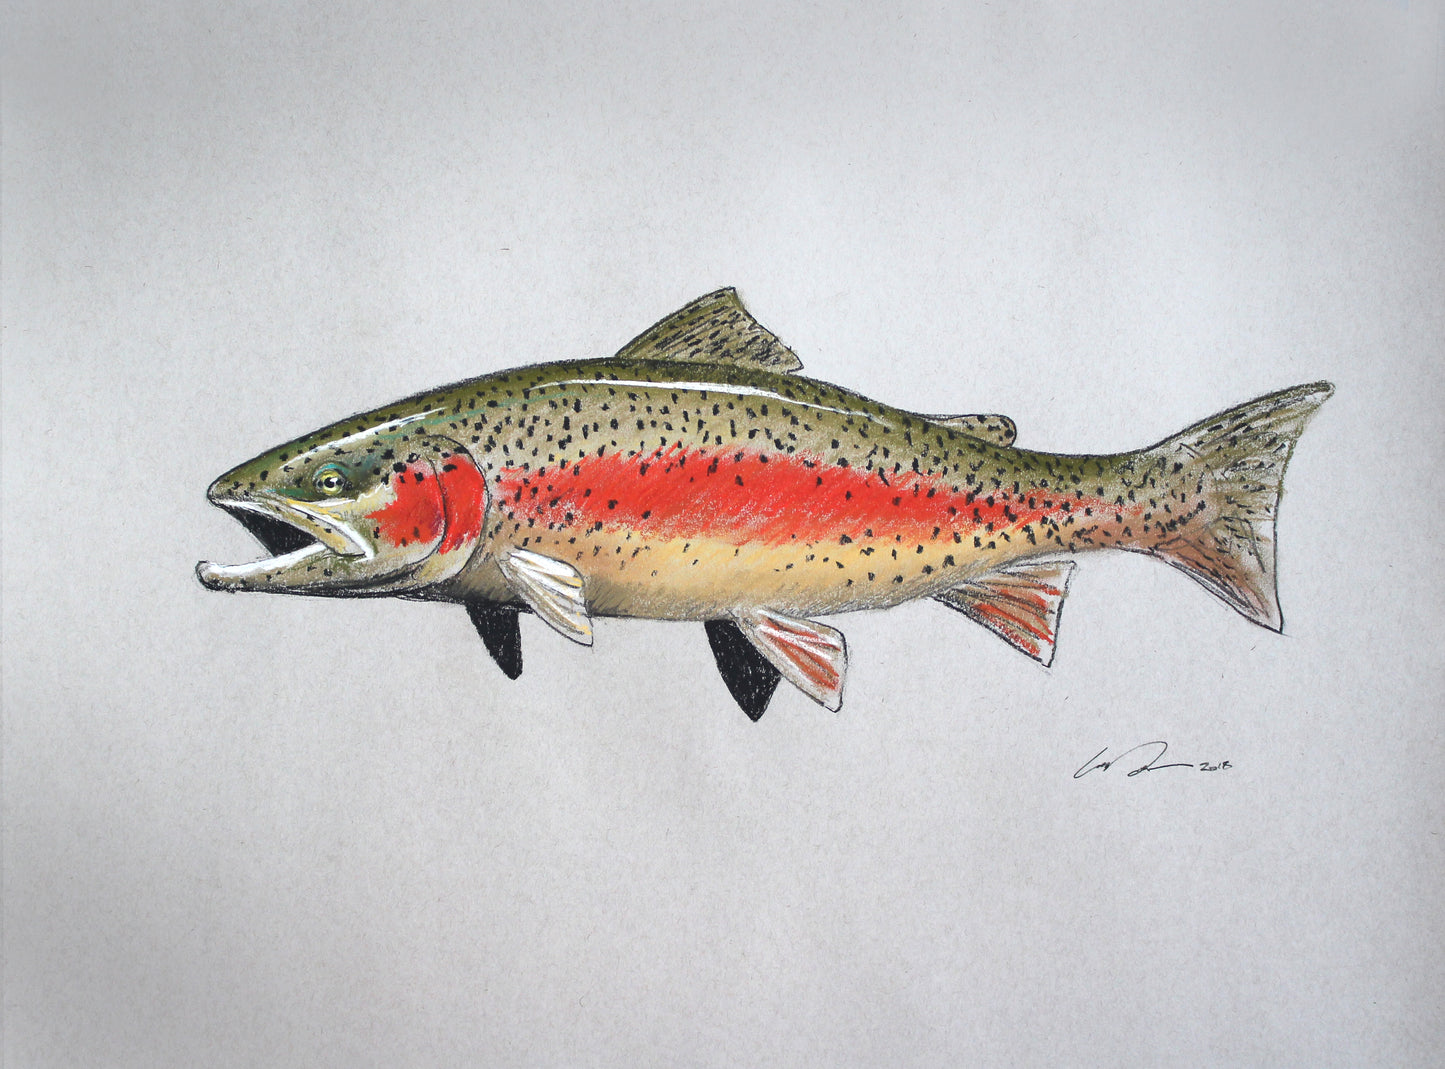 A full color drawing of a rainbow trout